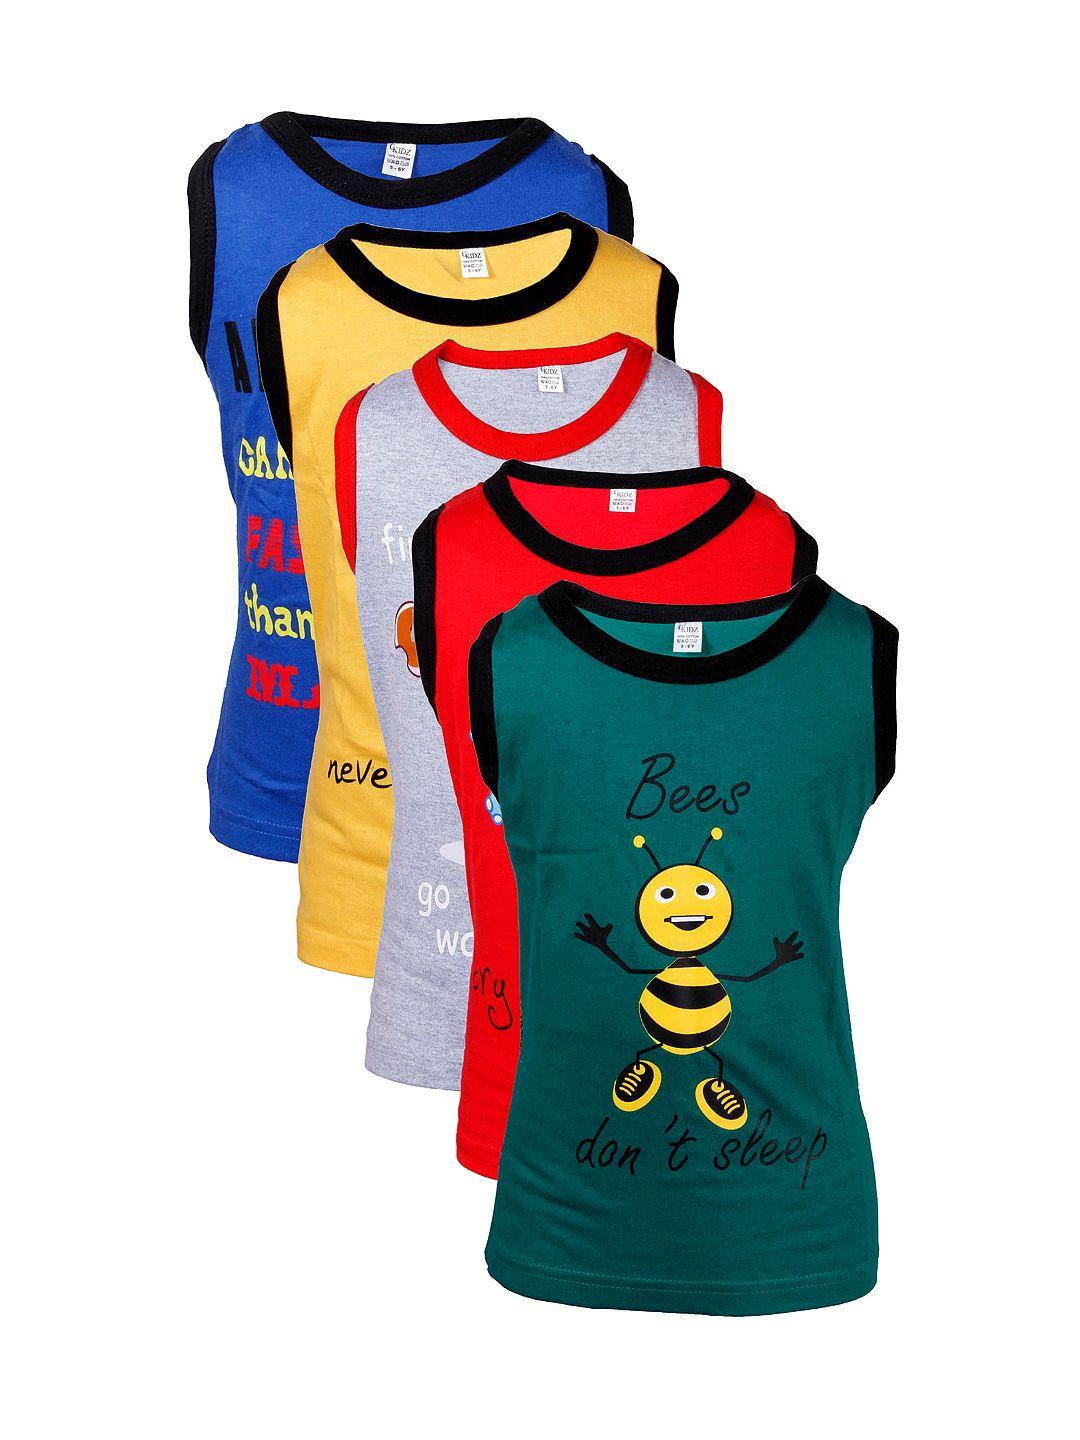 gkidz boys pack of 5 printed t-shirts